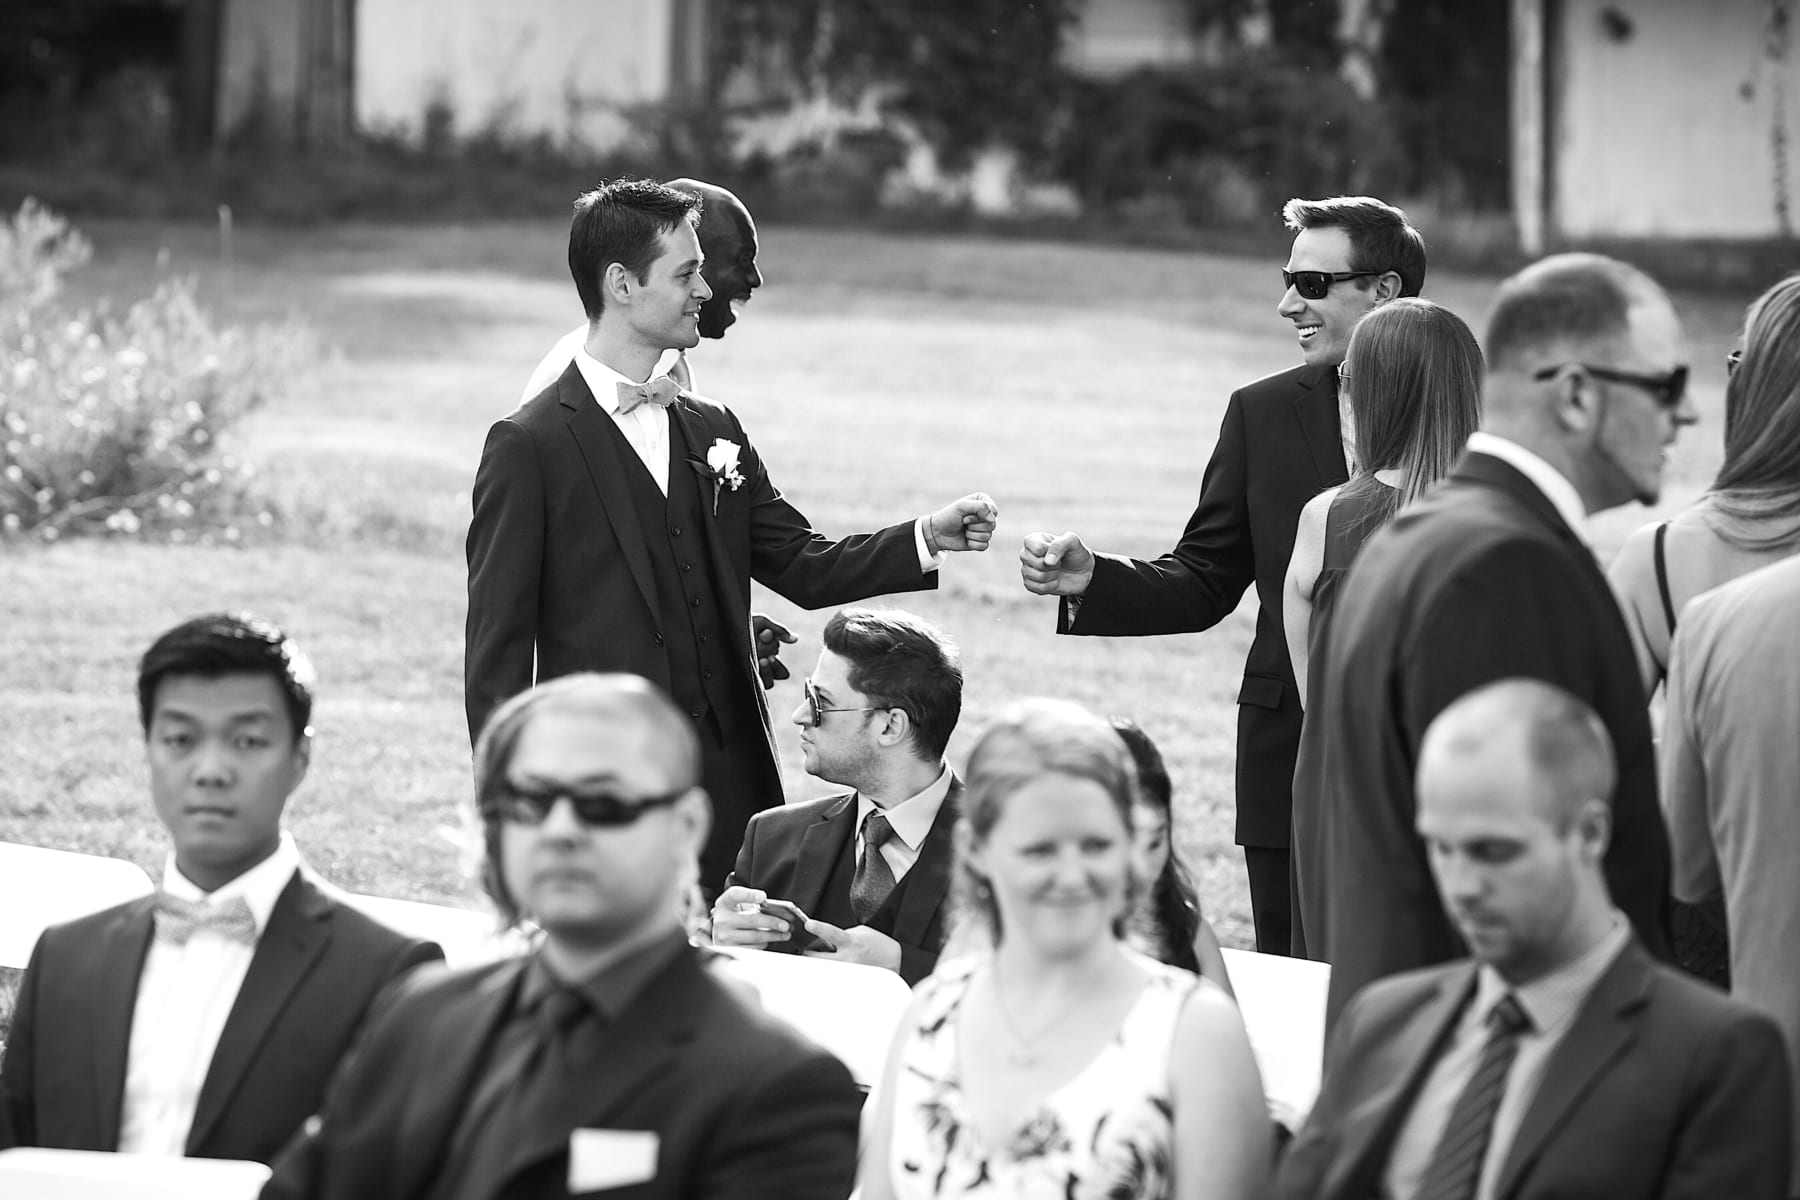 Groomsman and guest fist bumping.